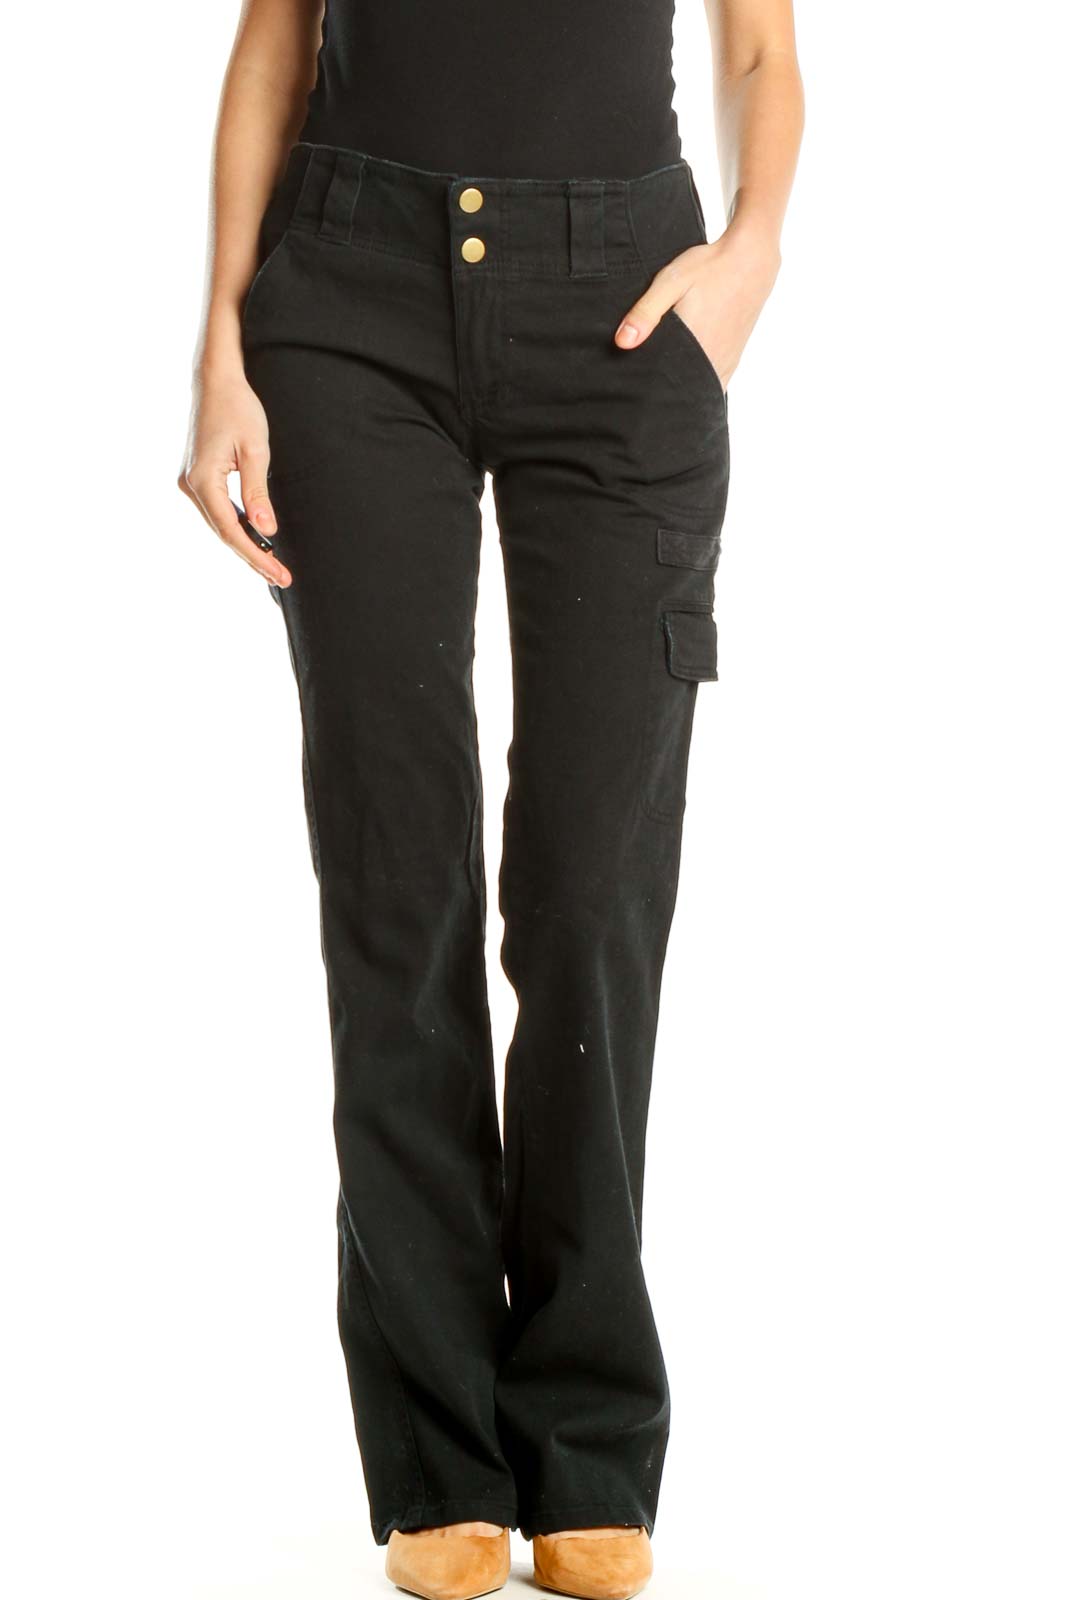 Black All Day Wear Pants Front